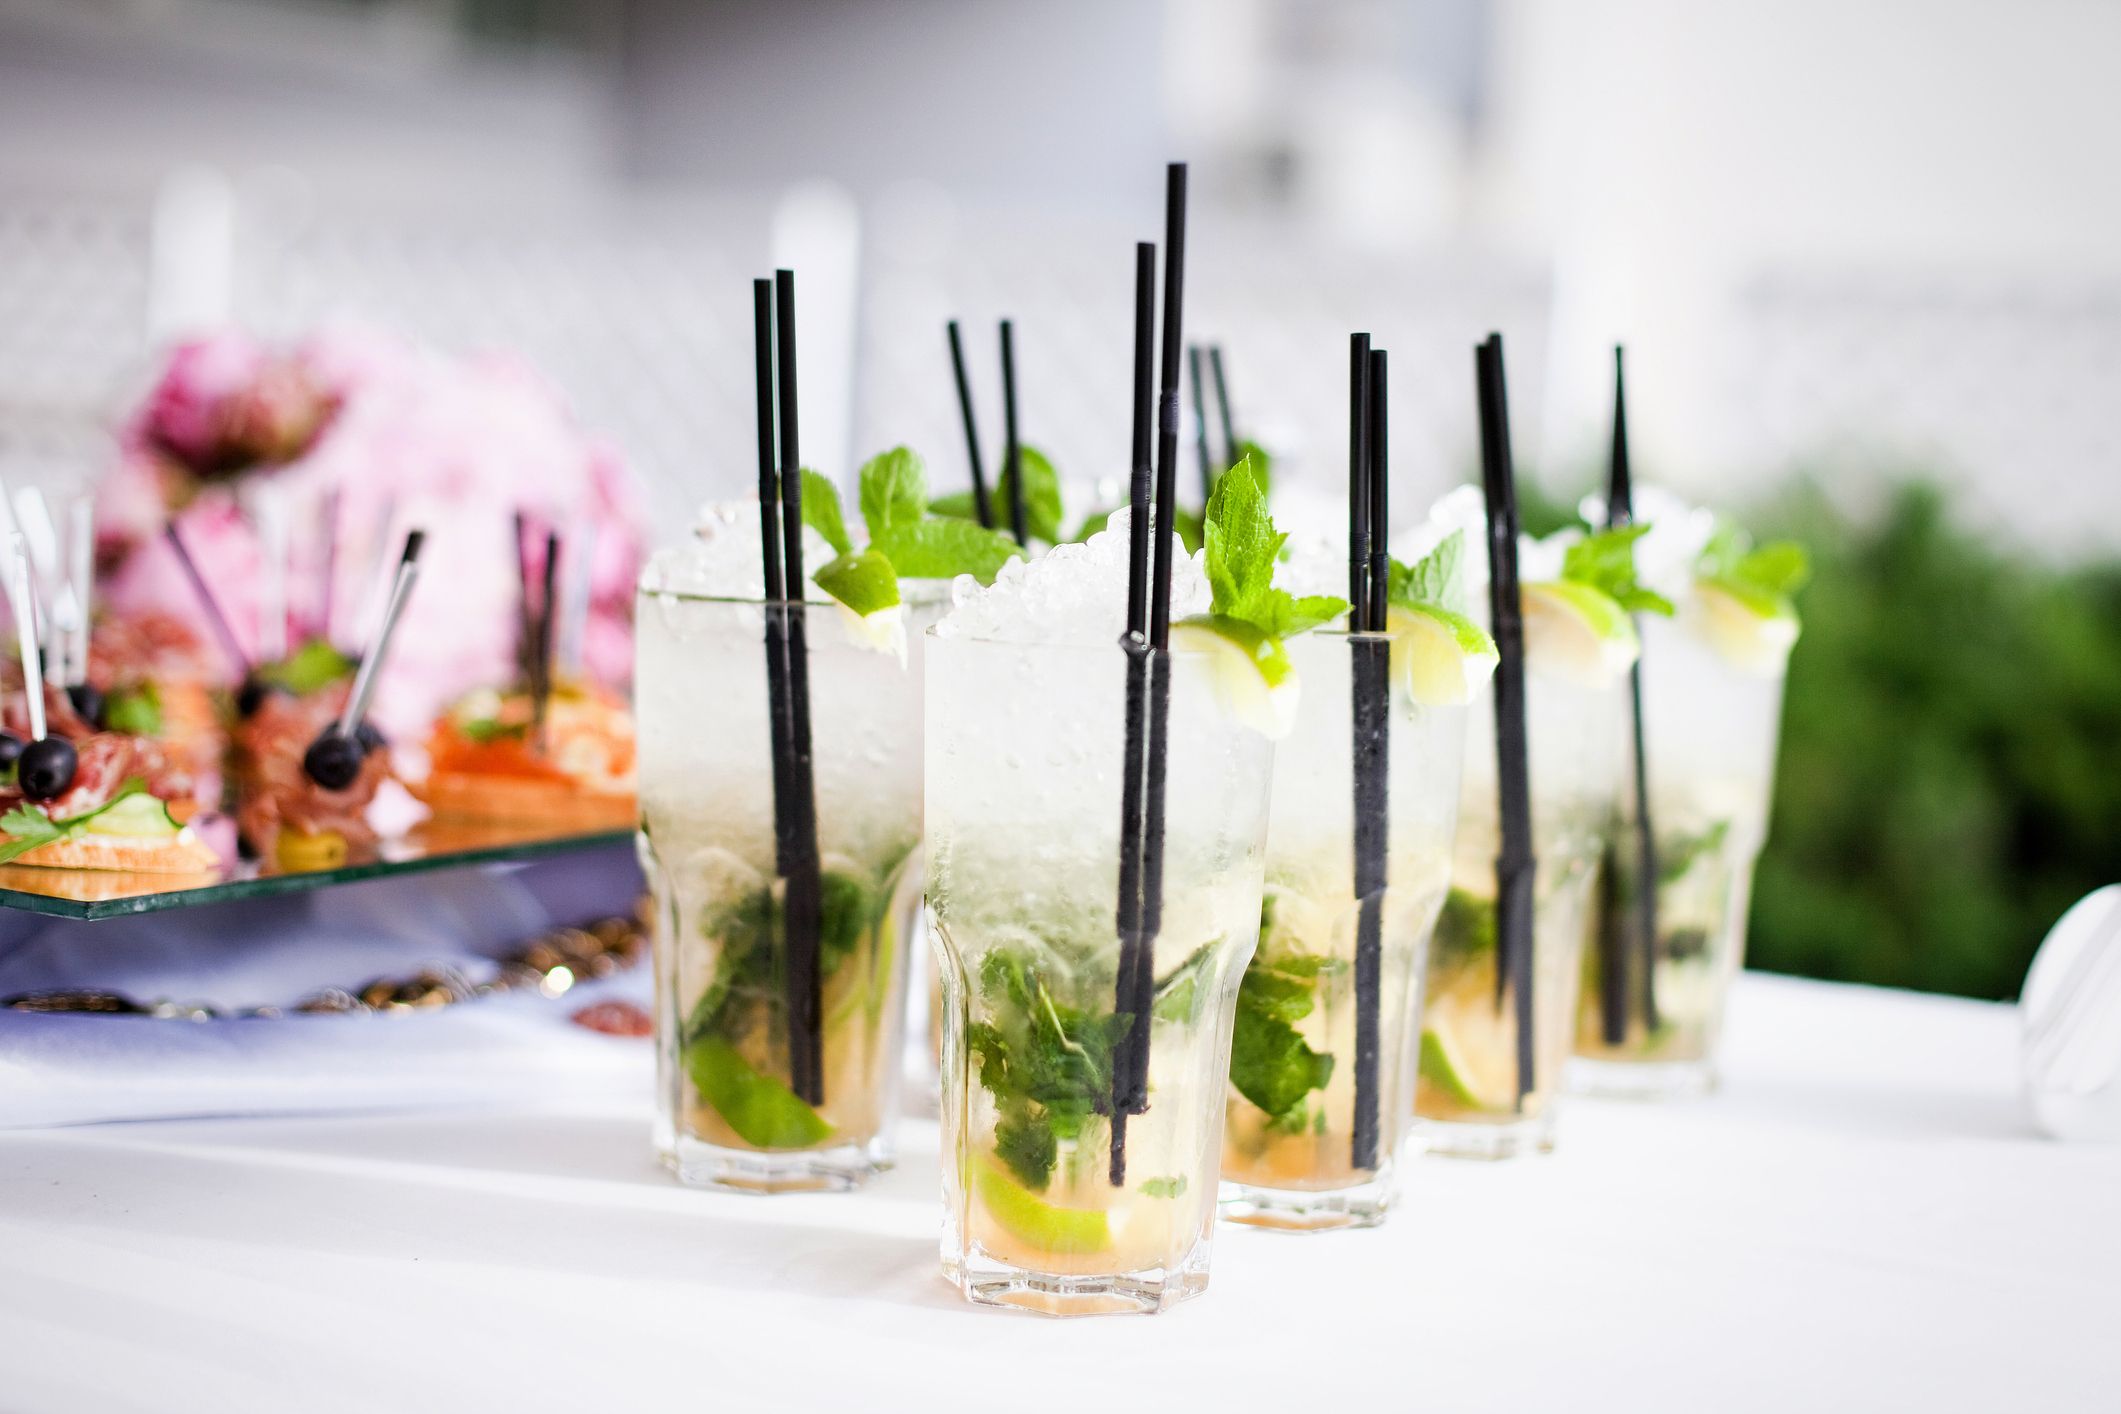 Cocktails at a party (Thinkstock/PA)